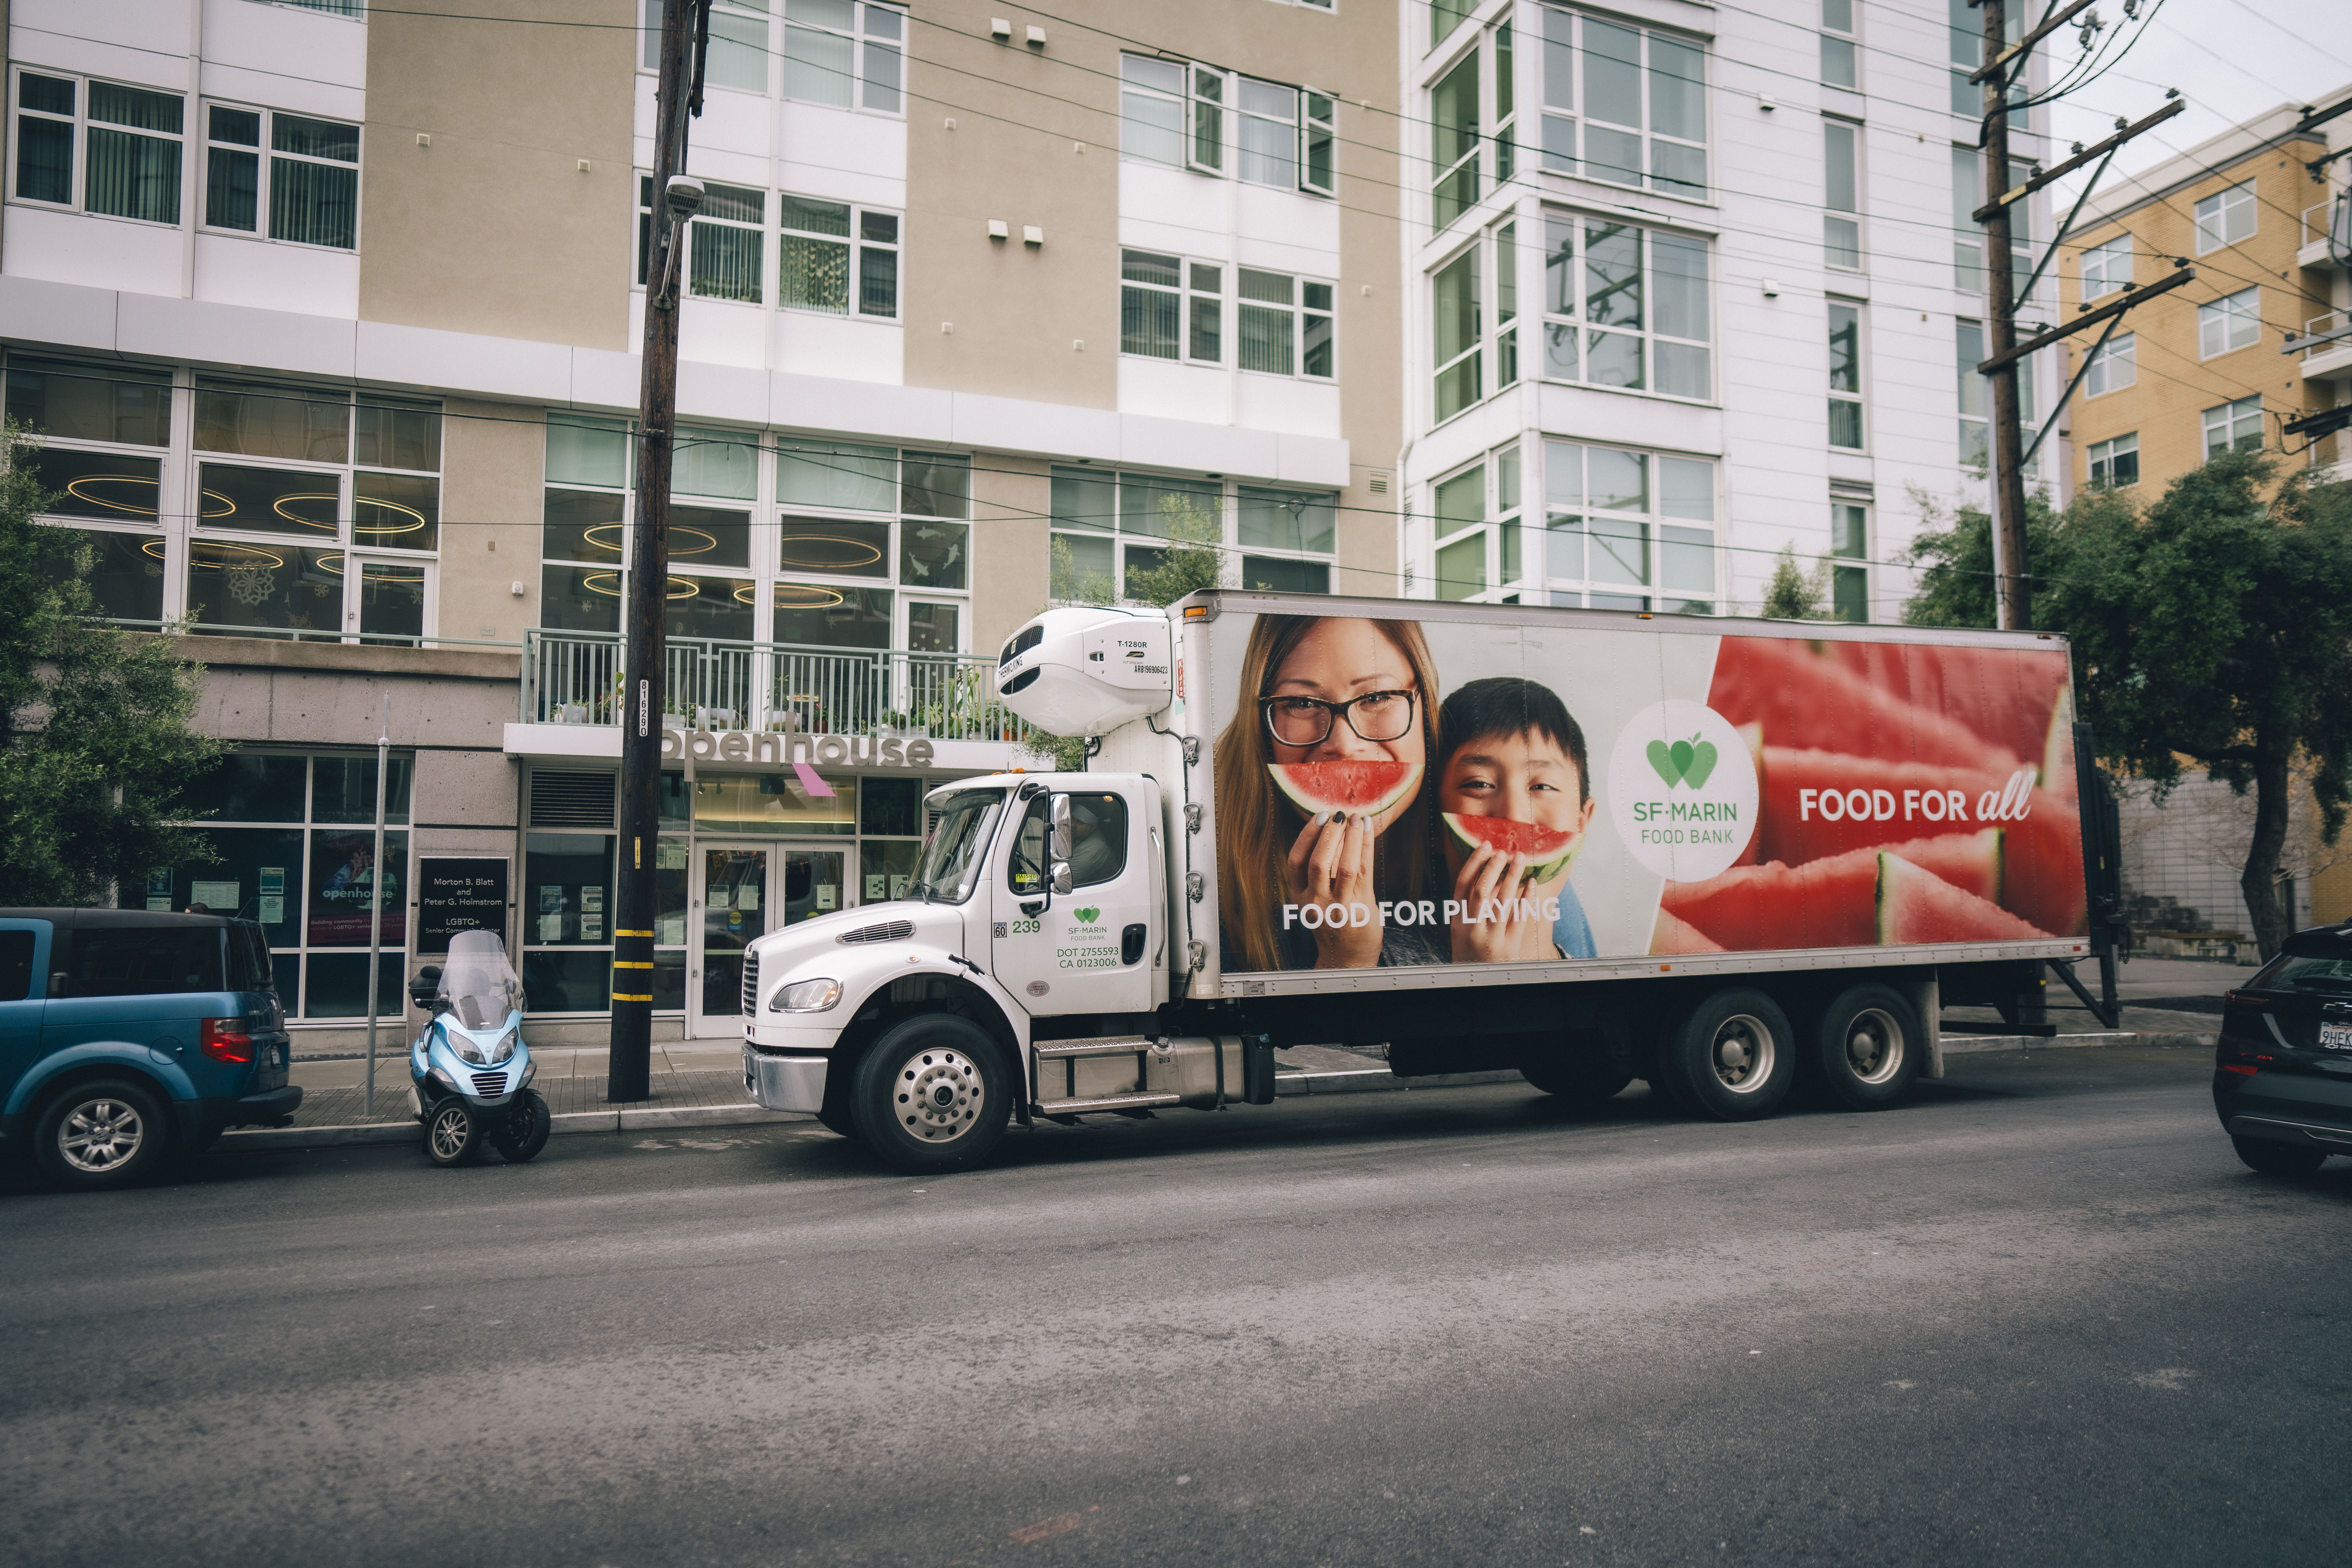 SF-Marin Food Bank truck in front of Openhouse